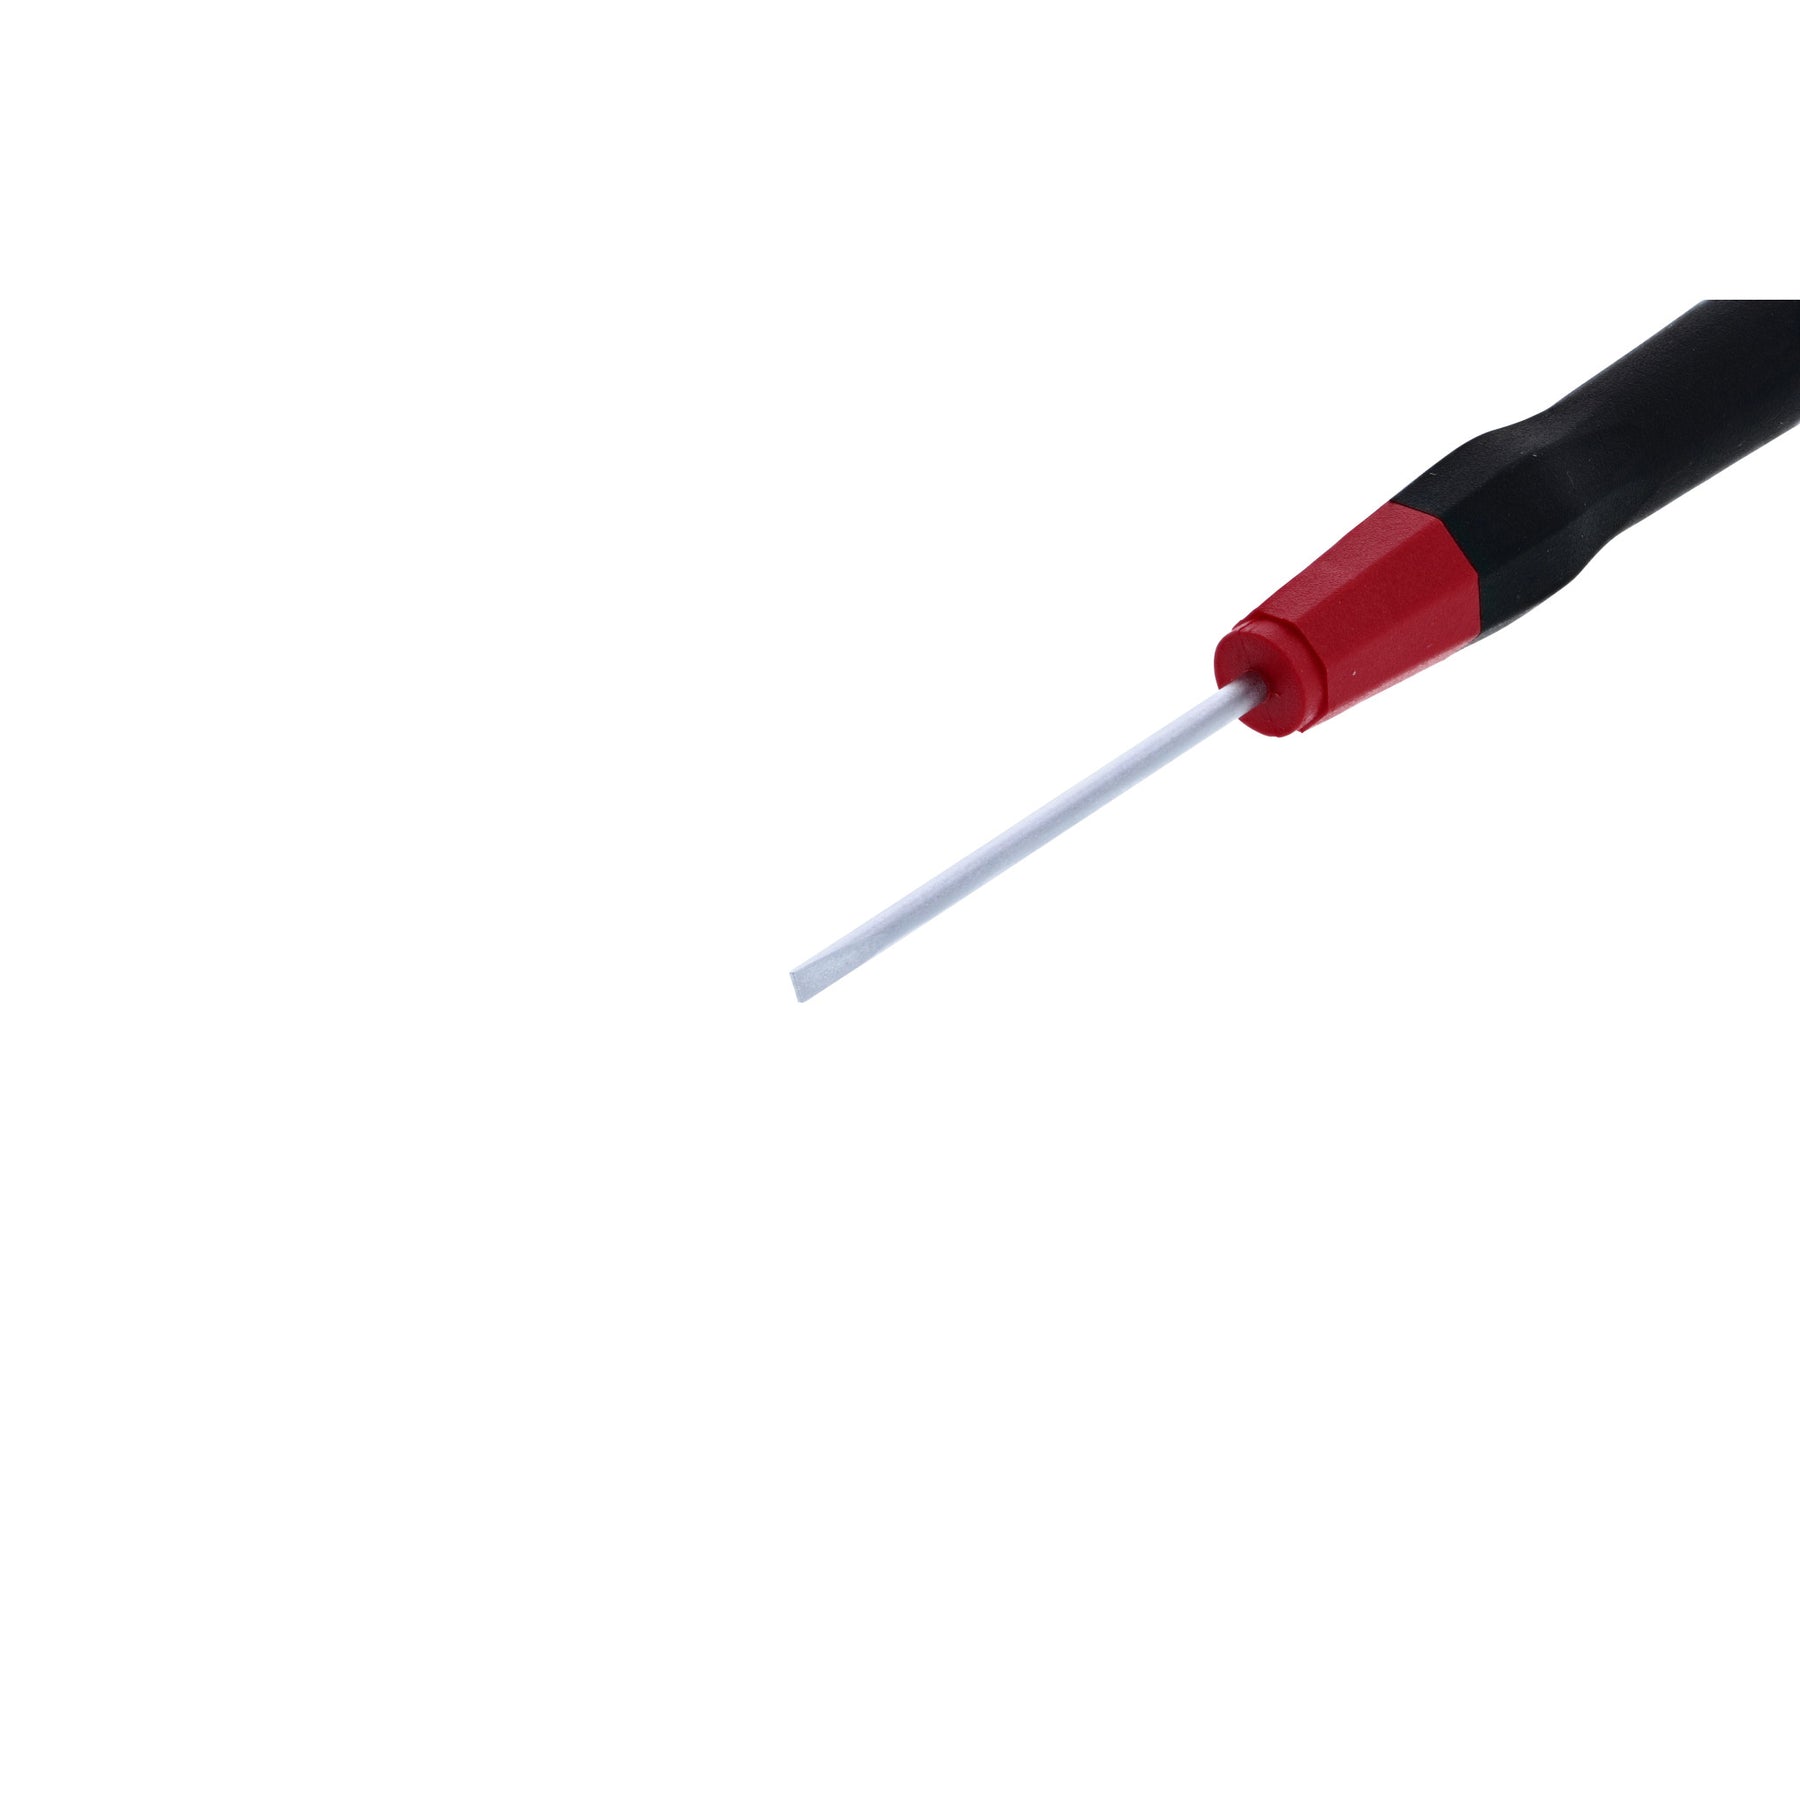 PicoFinish Slotted Screwdriver 2.0mm x 40mm